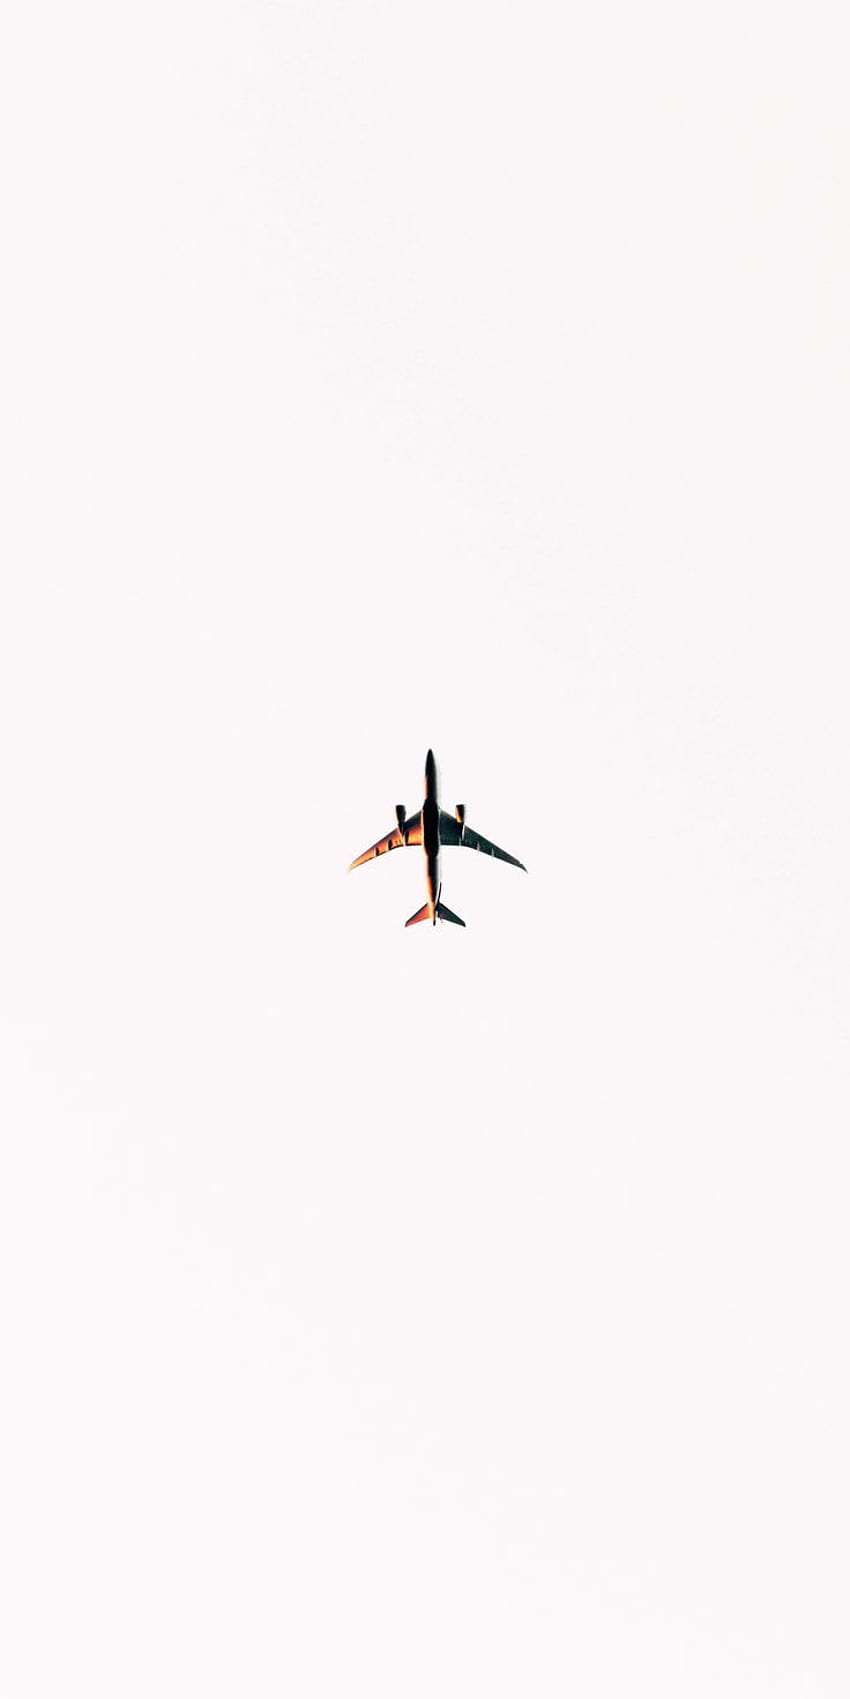 _ LoJtAr_ on Nature graphy. Airplane , Plane , Airplane graphy. Airplane , Plane , Airplane graphy, Cute Plane HD phone wallpaper